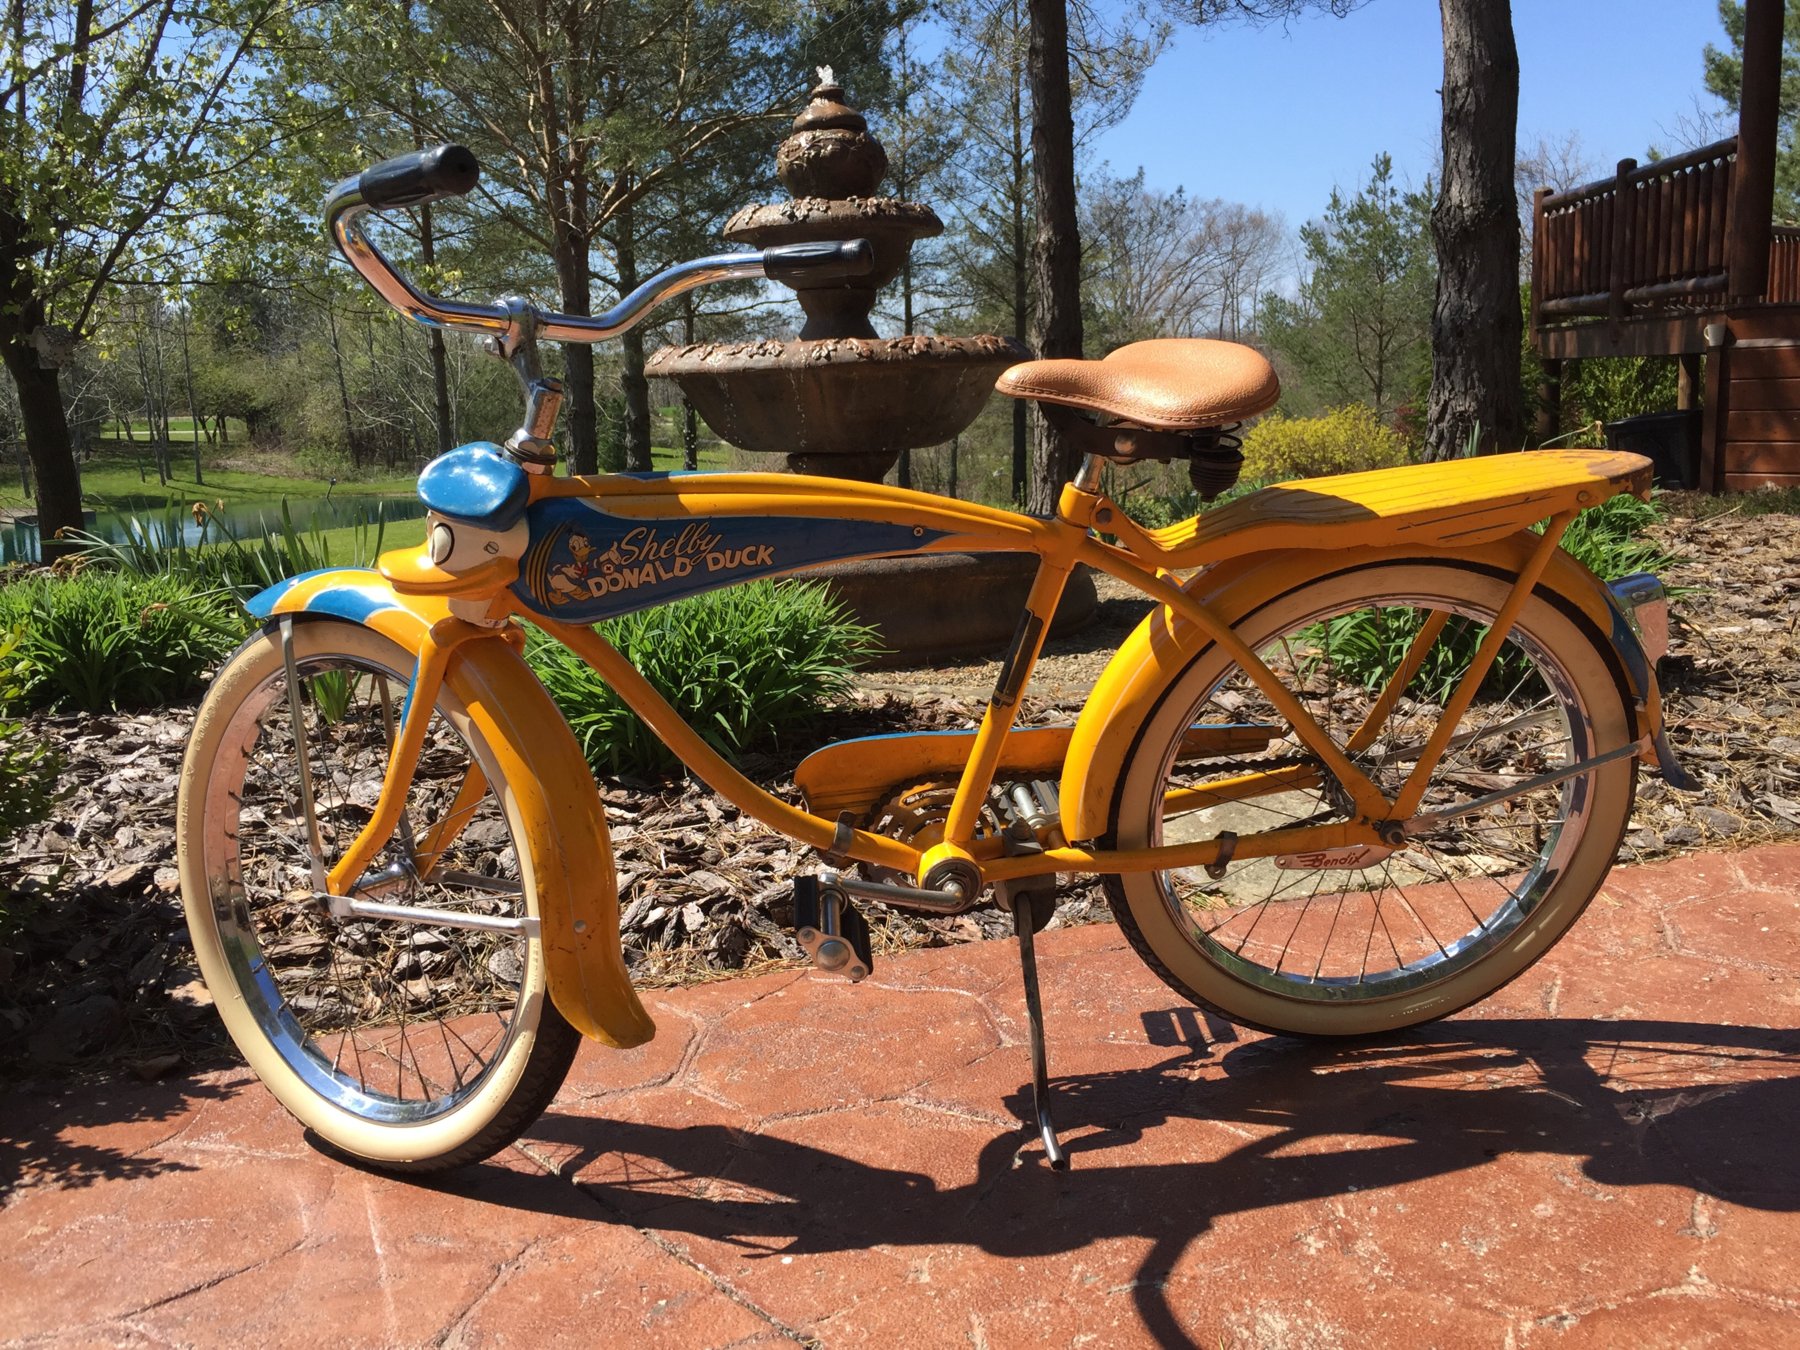 donald-duck-bike-the-classic-and-antique-bicycle-exchange